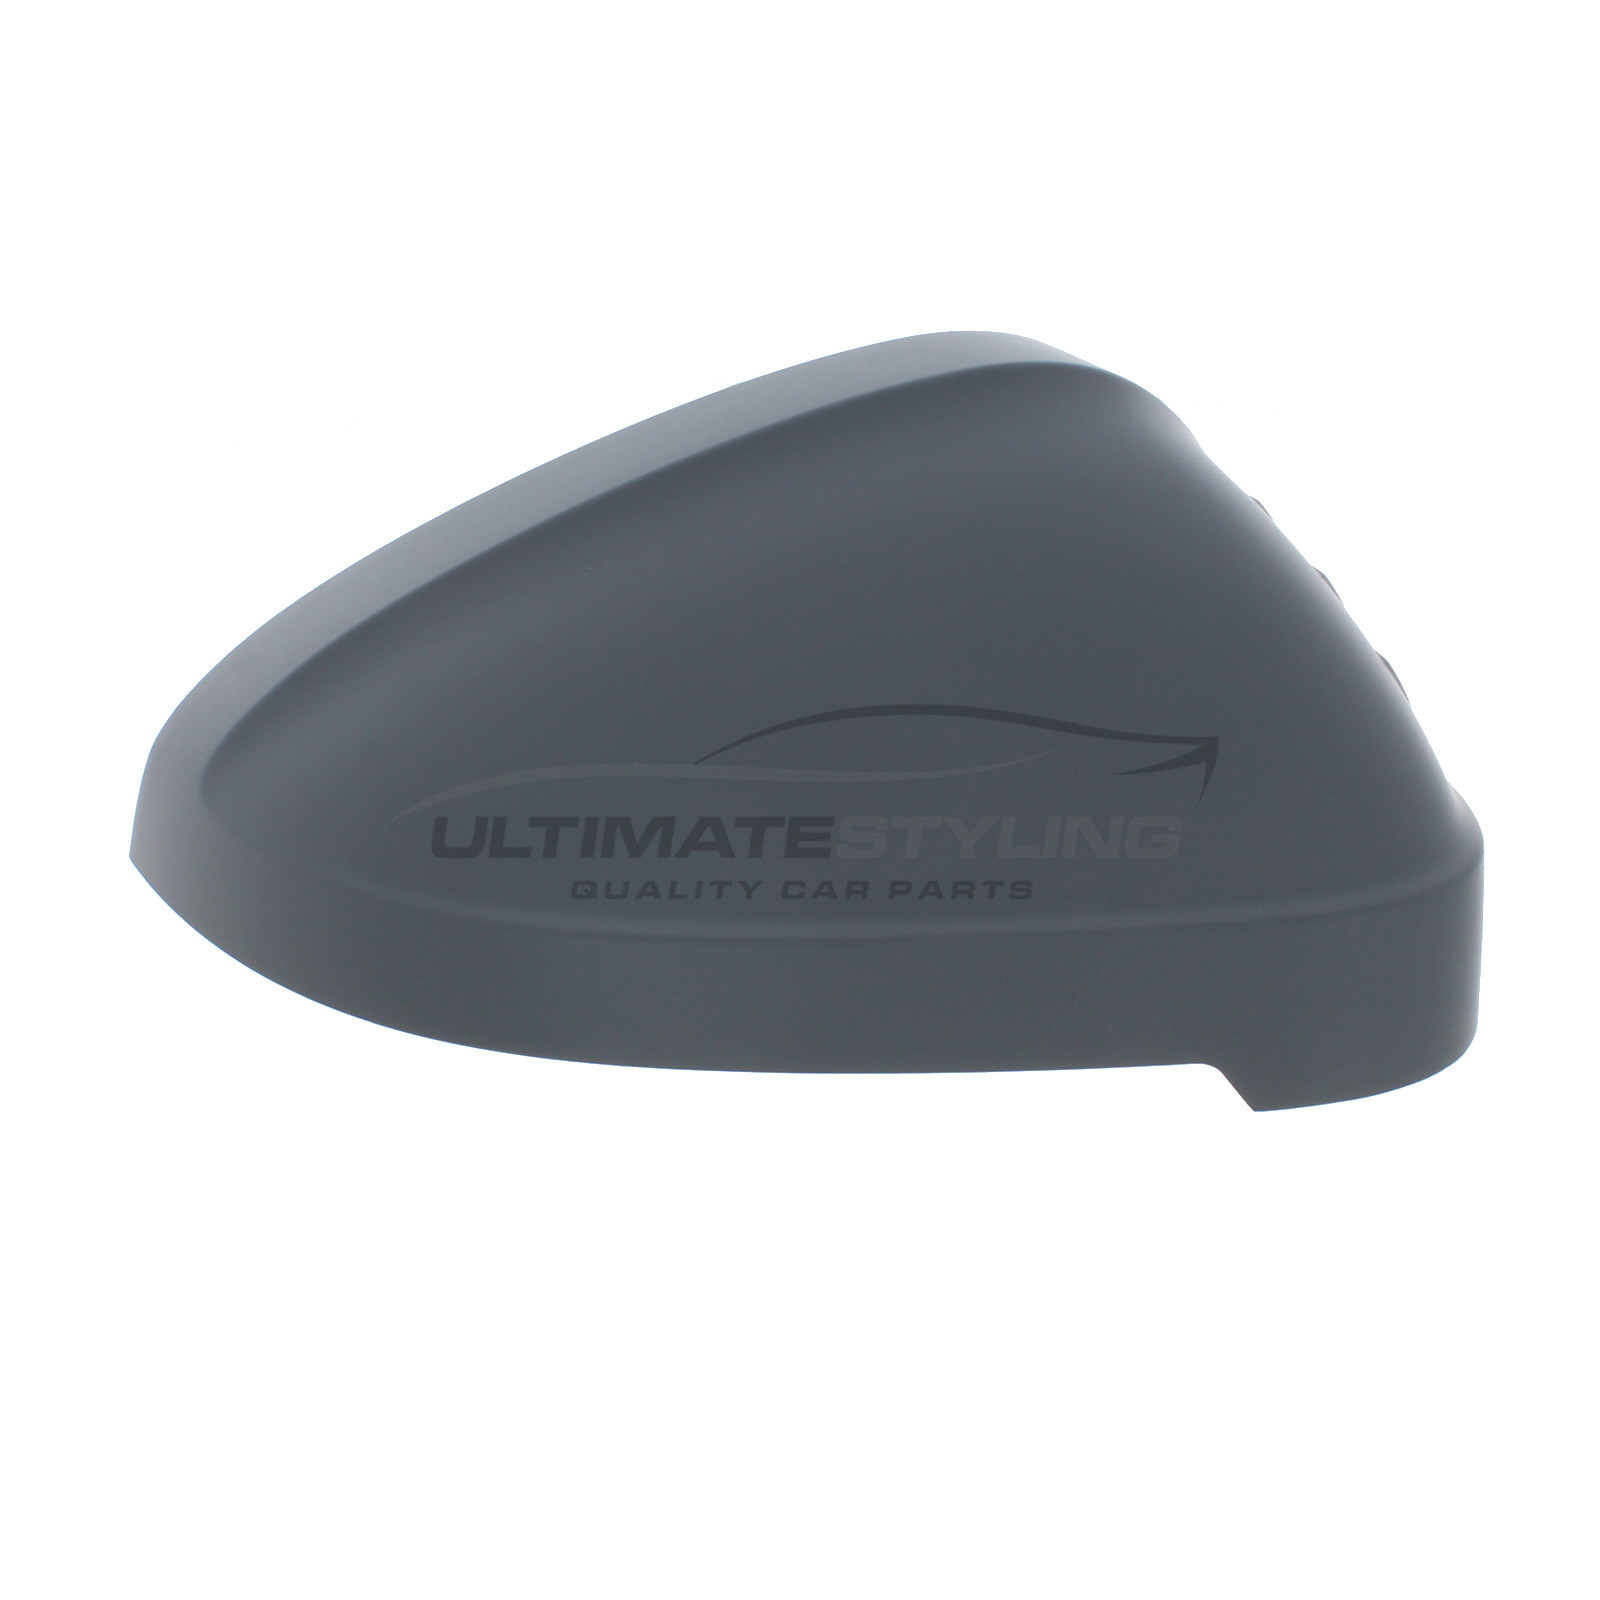 Audi A4 2015->, Audi A5 2016-> Wing Mirror Cover Cap Casing Primed Drivers Side (RH) Excludes Aperture for Side Assist Indicator